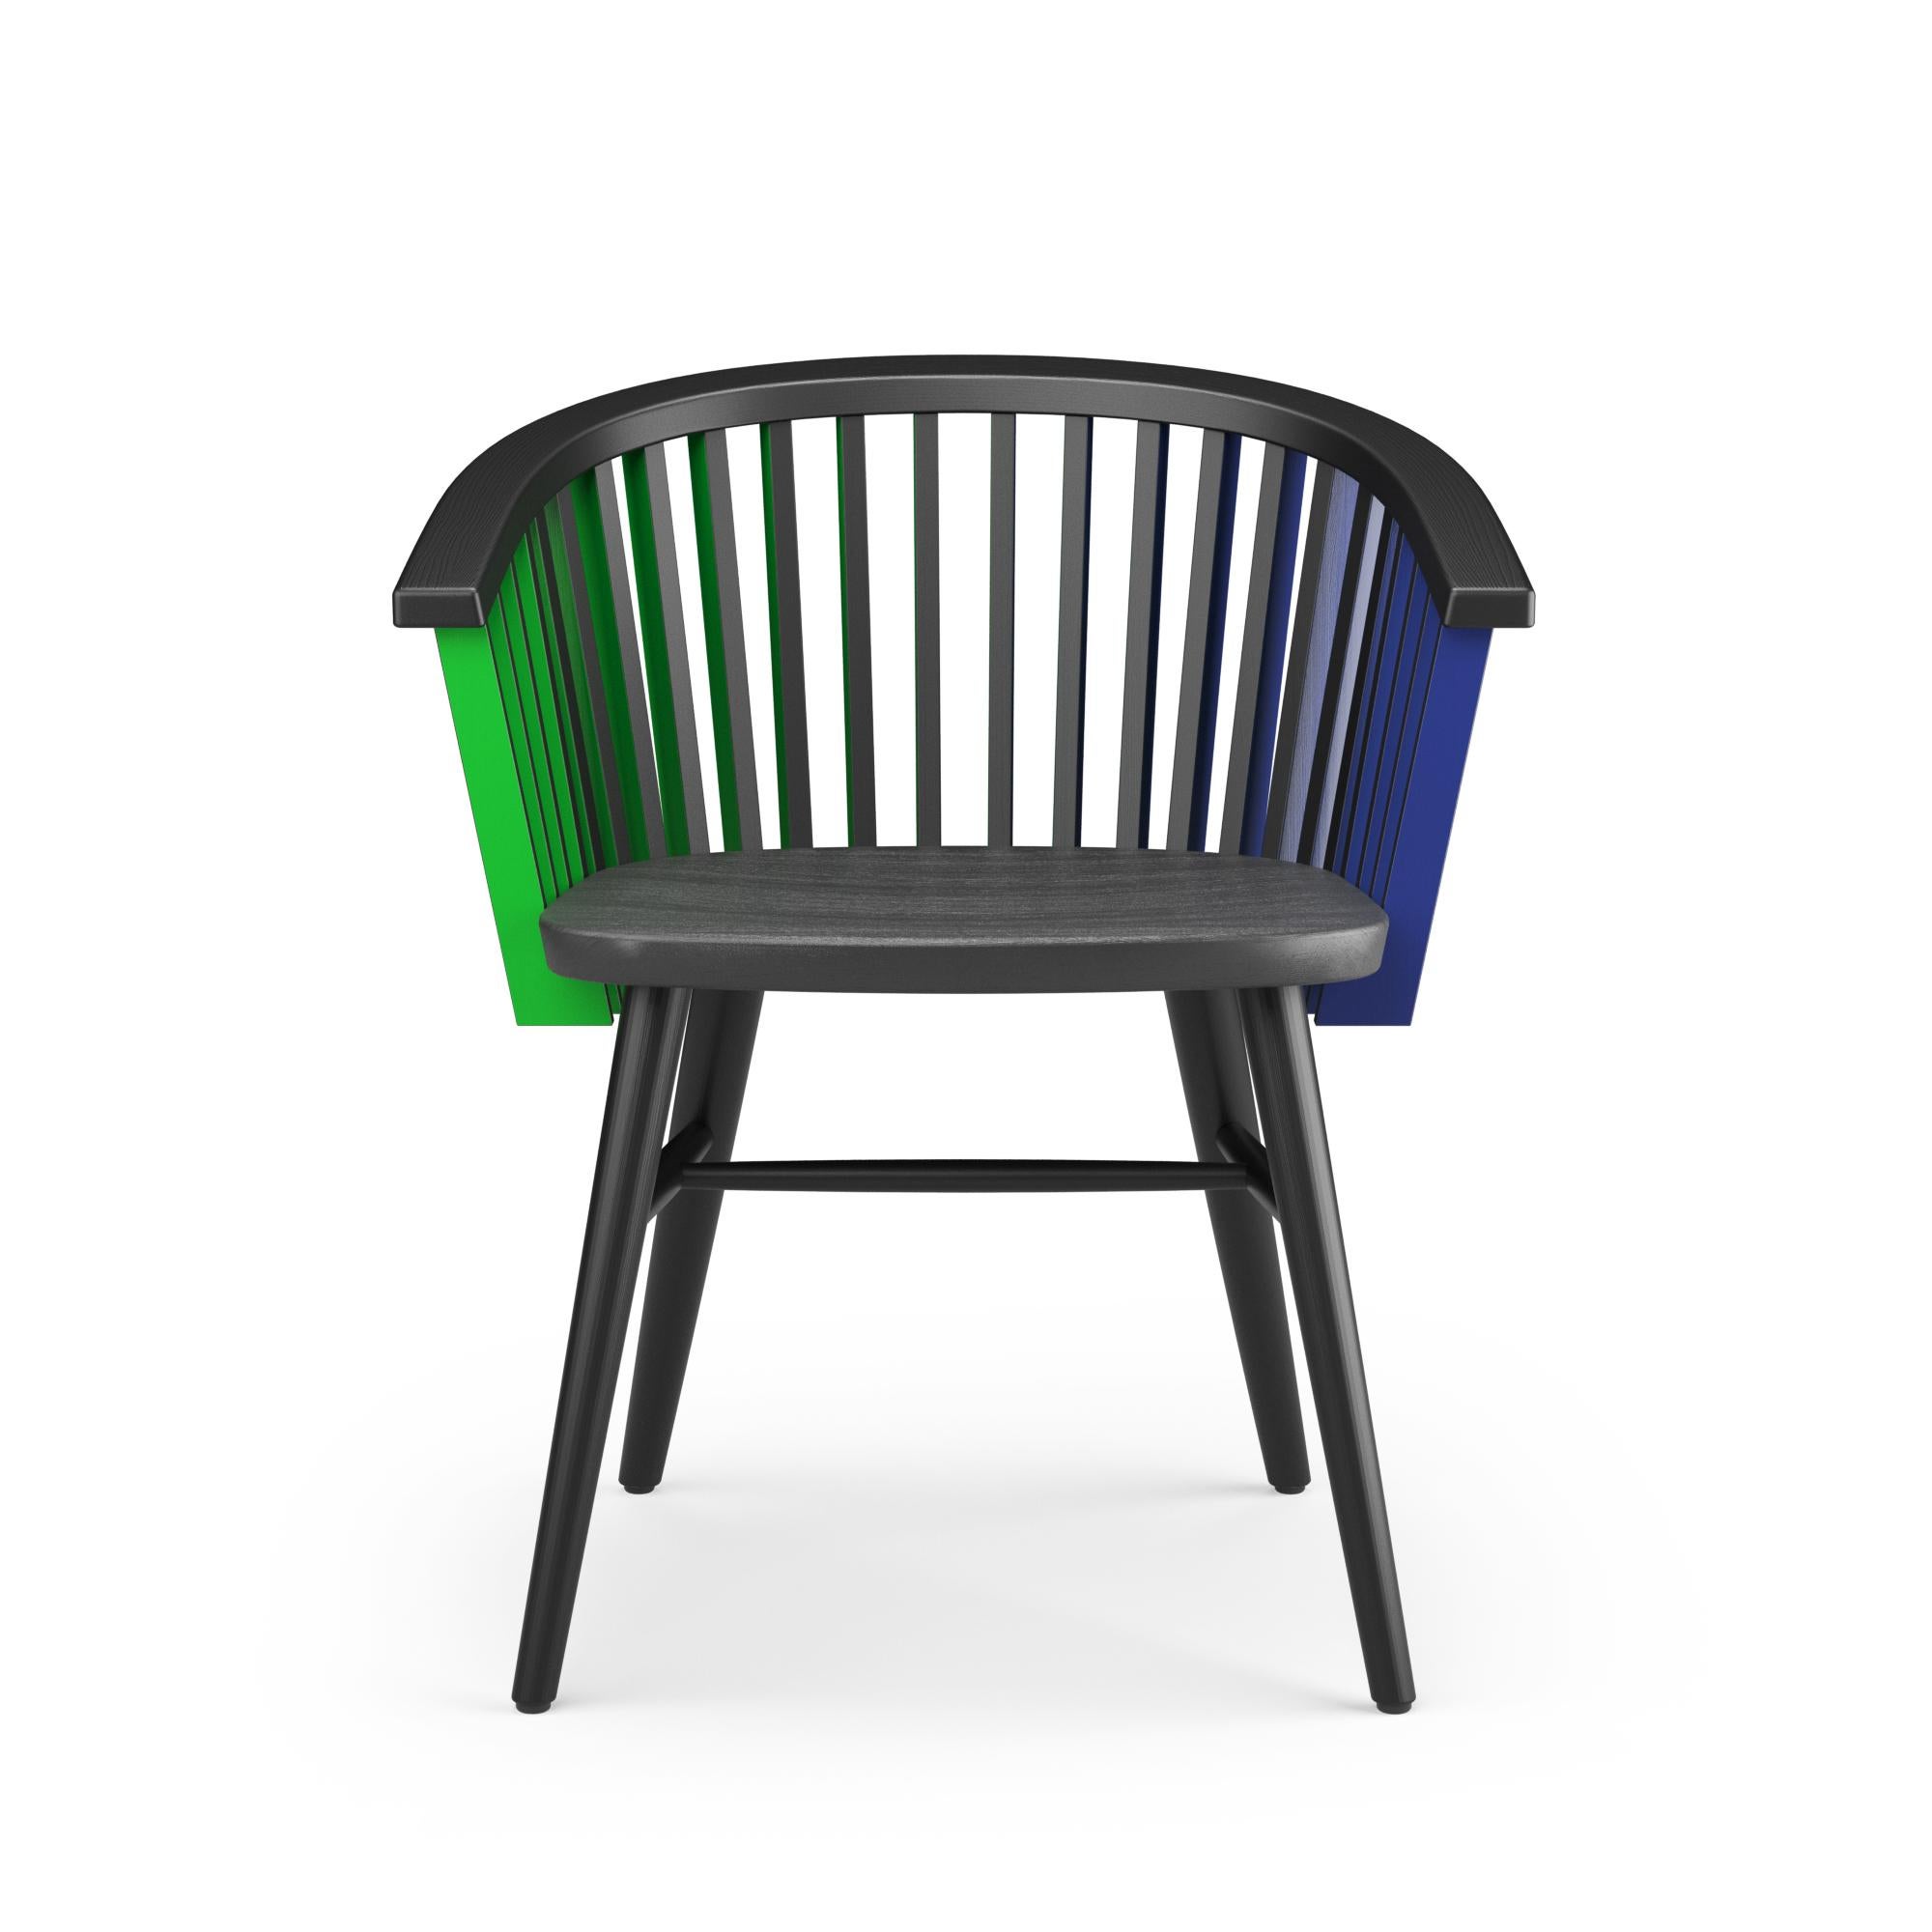 Mexican Hayche, Tornasol Rounded chair, Bla, Green & Blue, Solid Wood, UK, Made To Order For Sale